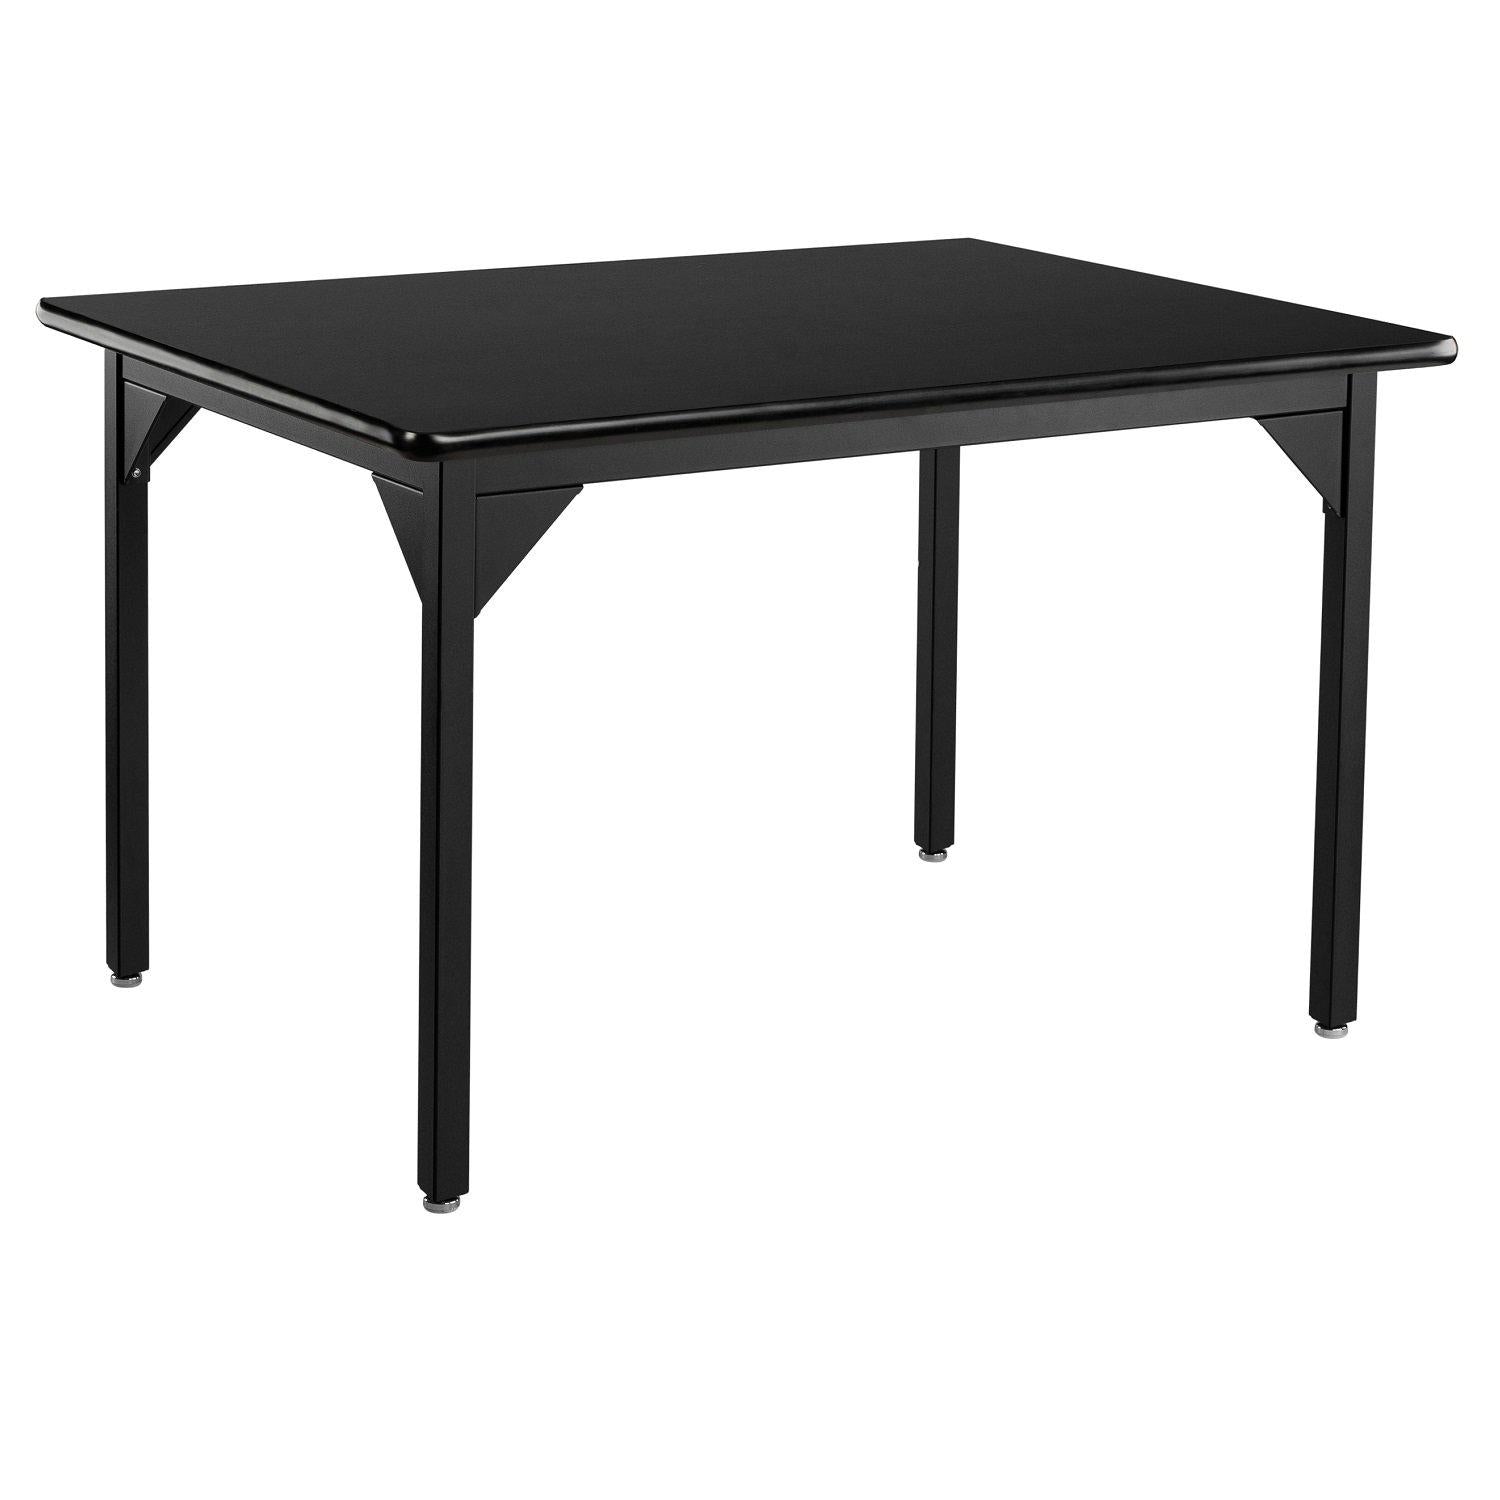 Heavy-Duty Fixed Height Utility Table, Black Frame, 36" x 48", High-Pressure Laminate Top with T-Mold Edge